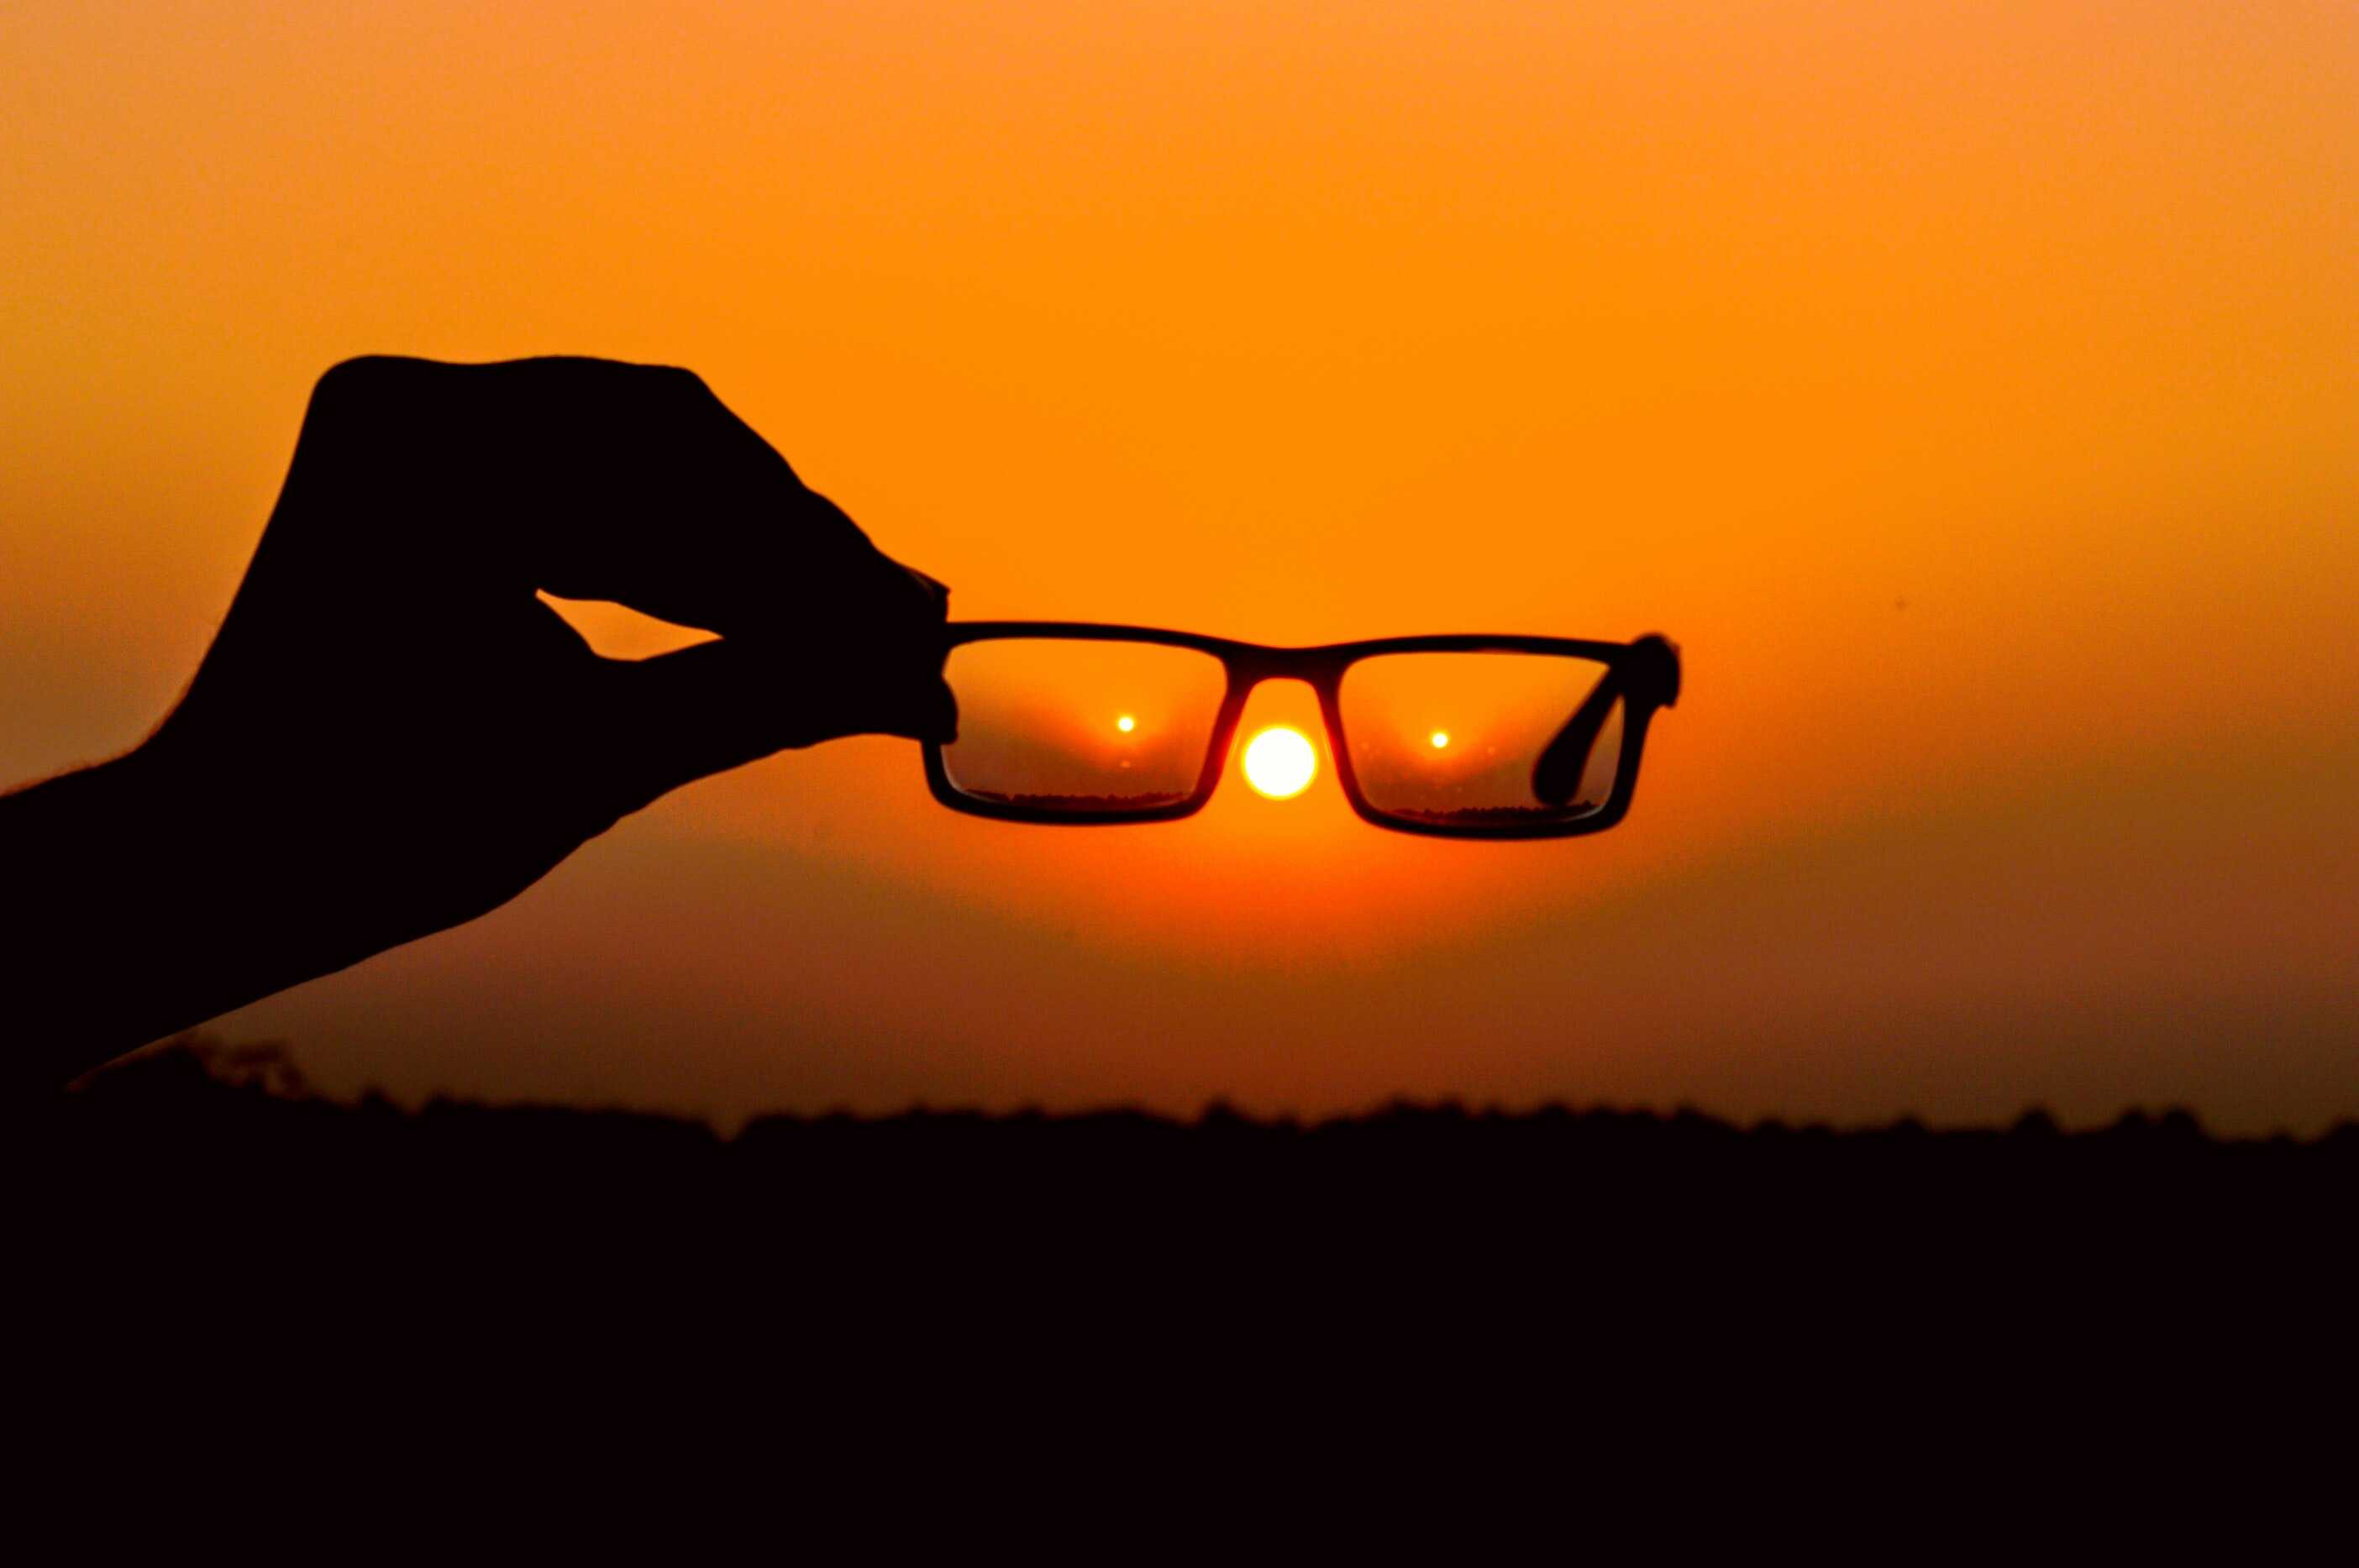 Silhouette of person's hand holding eyeglasses during golden hour photo